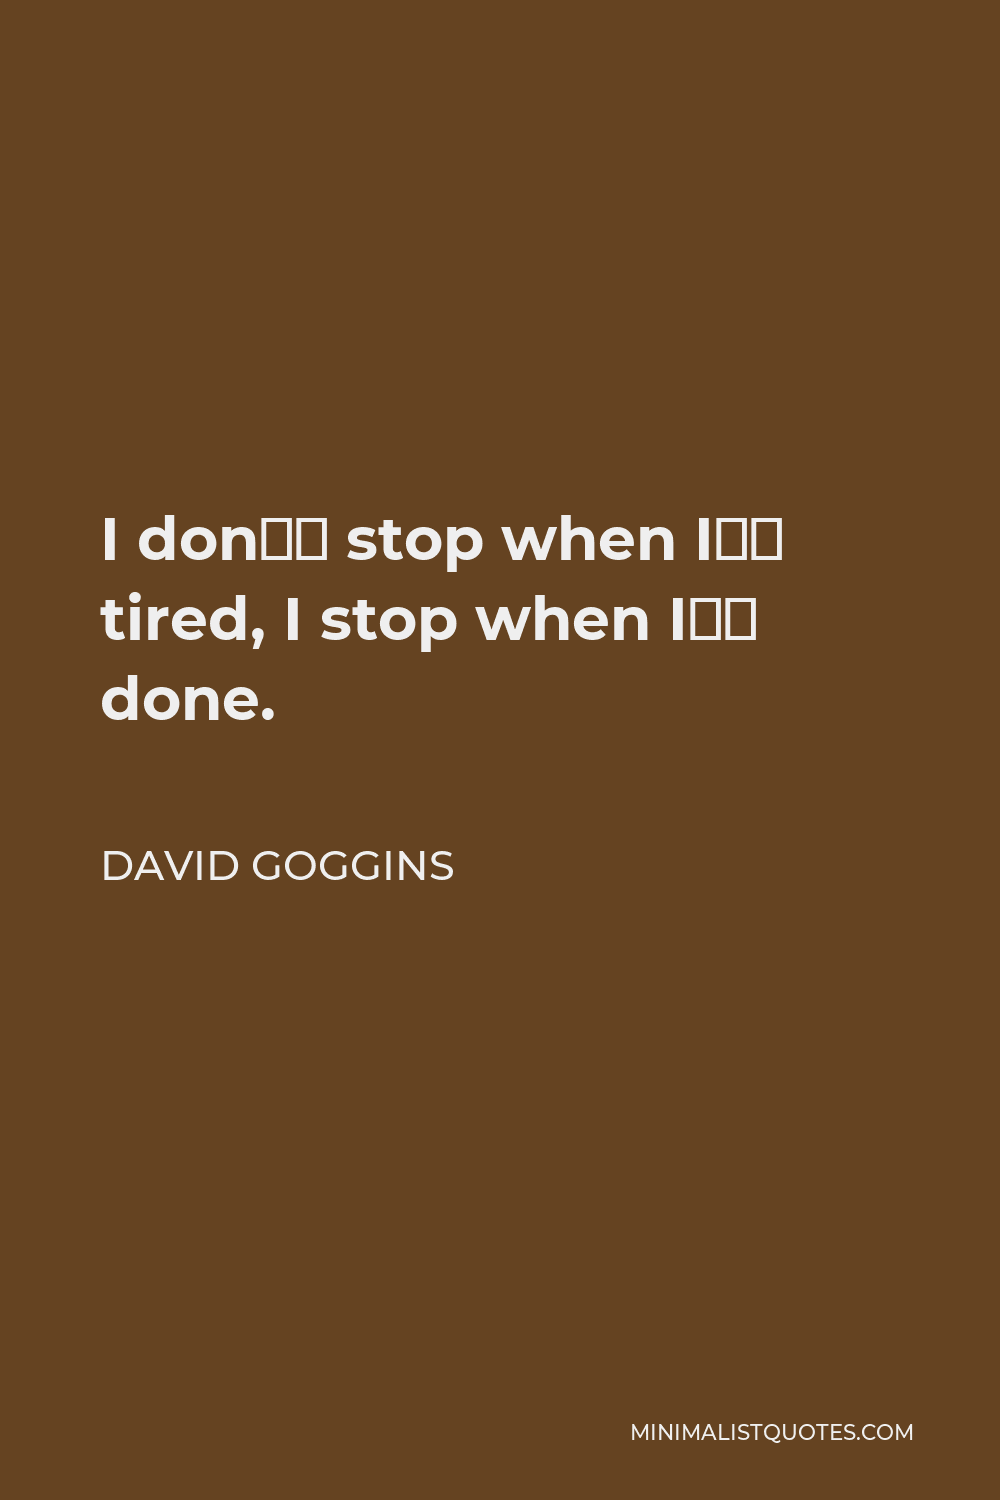 David Goggins Quote - I don’t stop when I’m tired, I stop when I’m done.